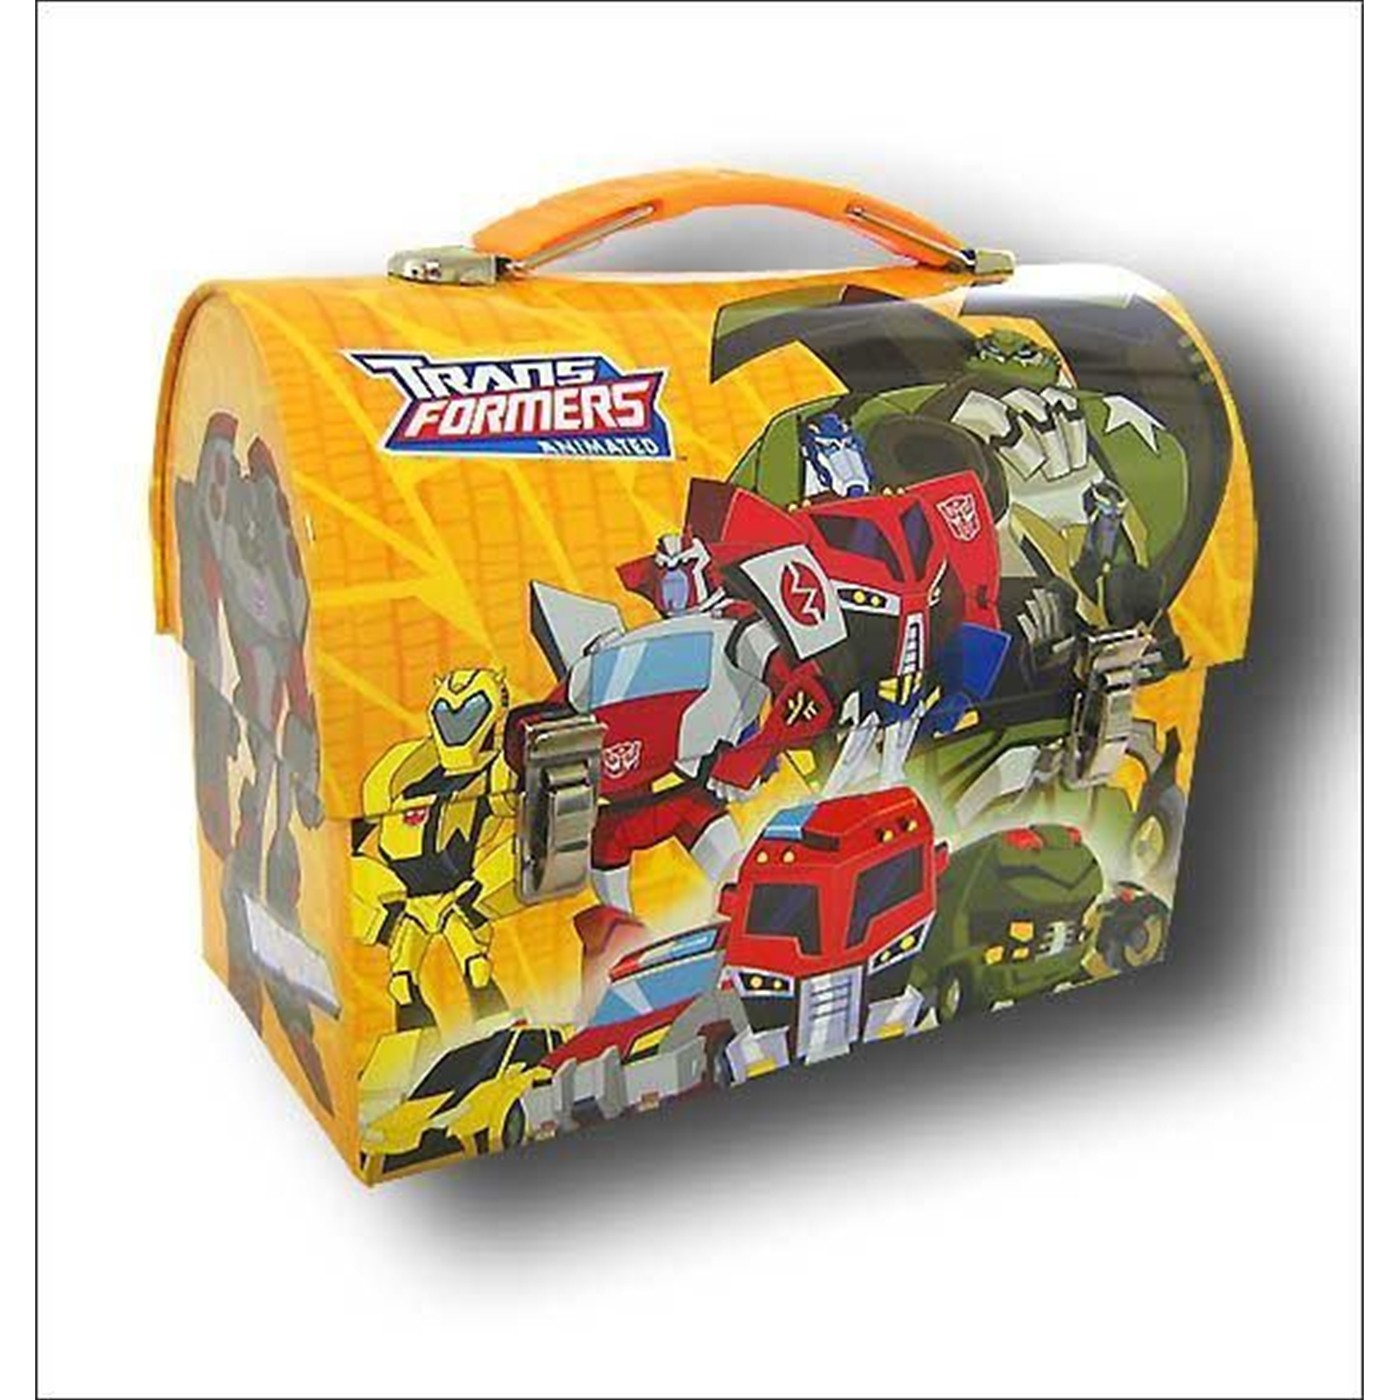 Transformers Autobots Decepticons Yellow Dome Lunchbox